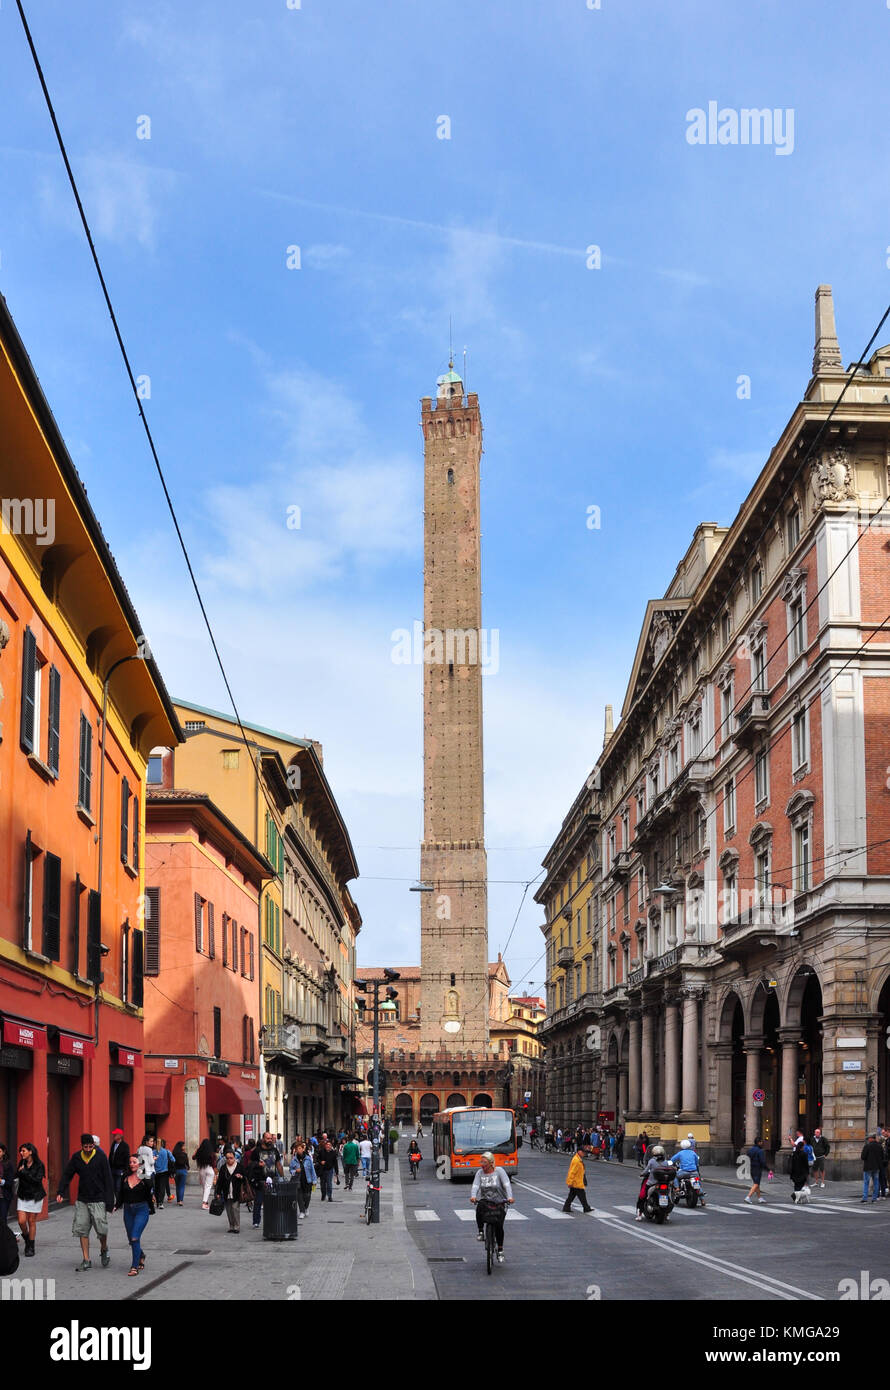 Via Rizzoli with Asinelli Tower at the end, Bologna, Italy Stock Photo